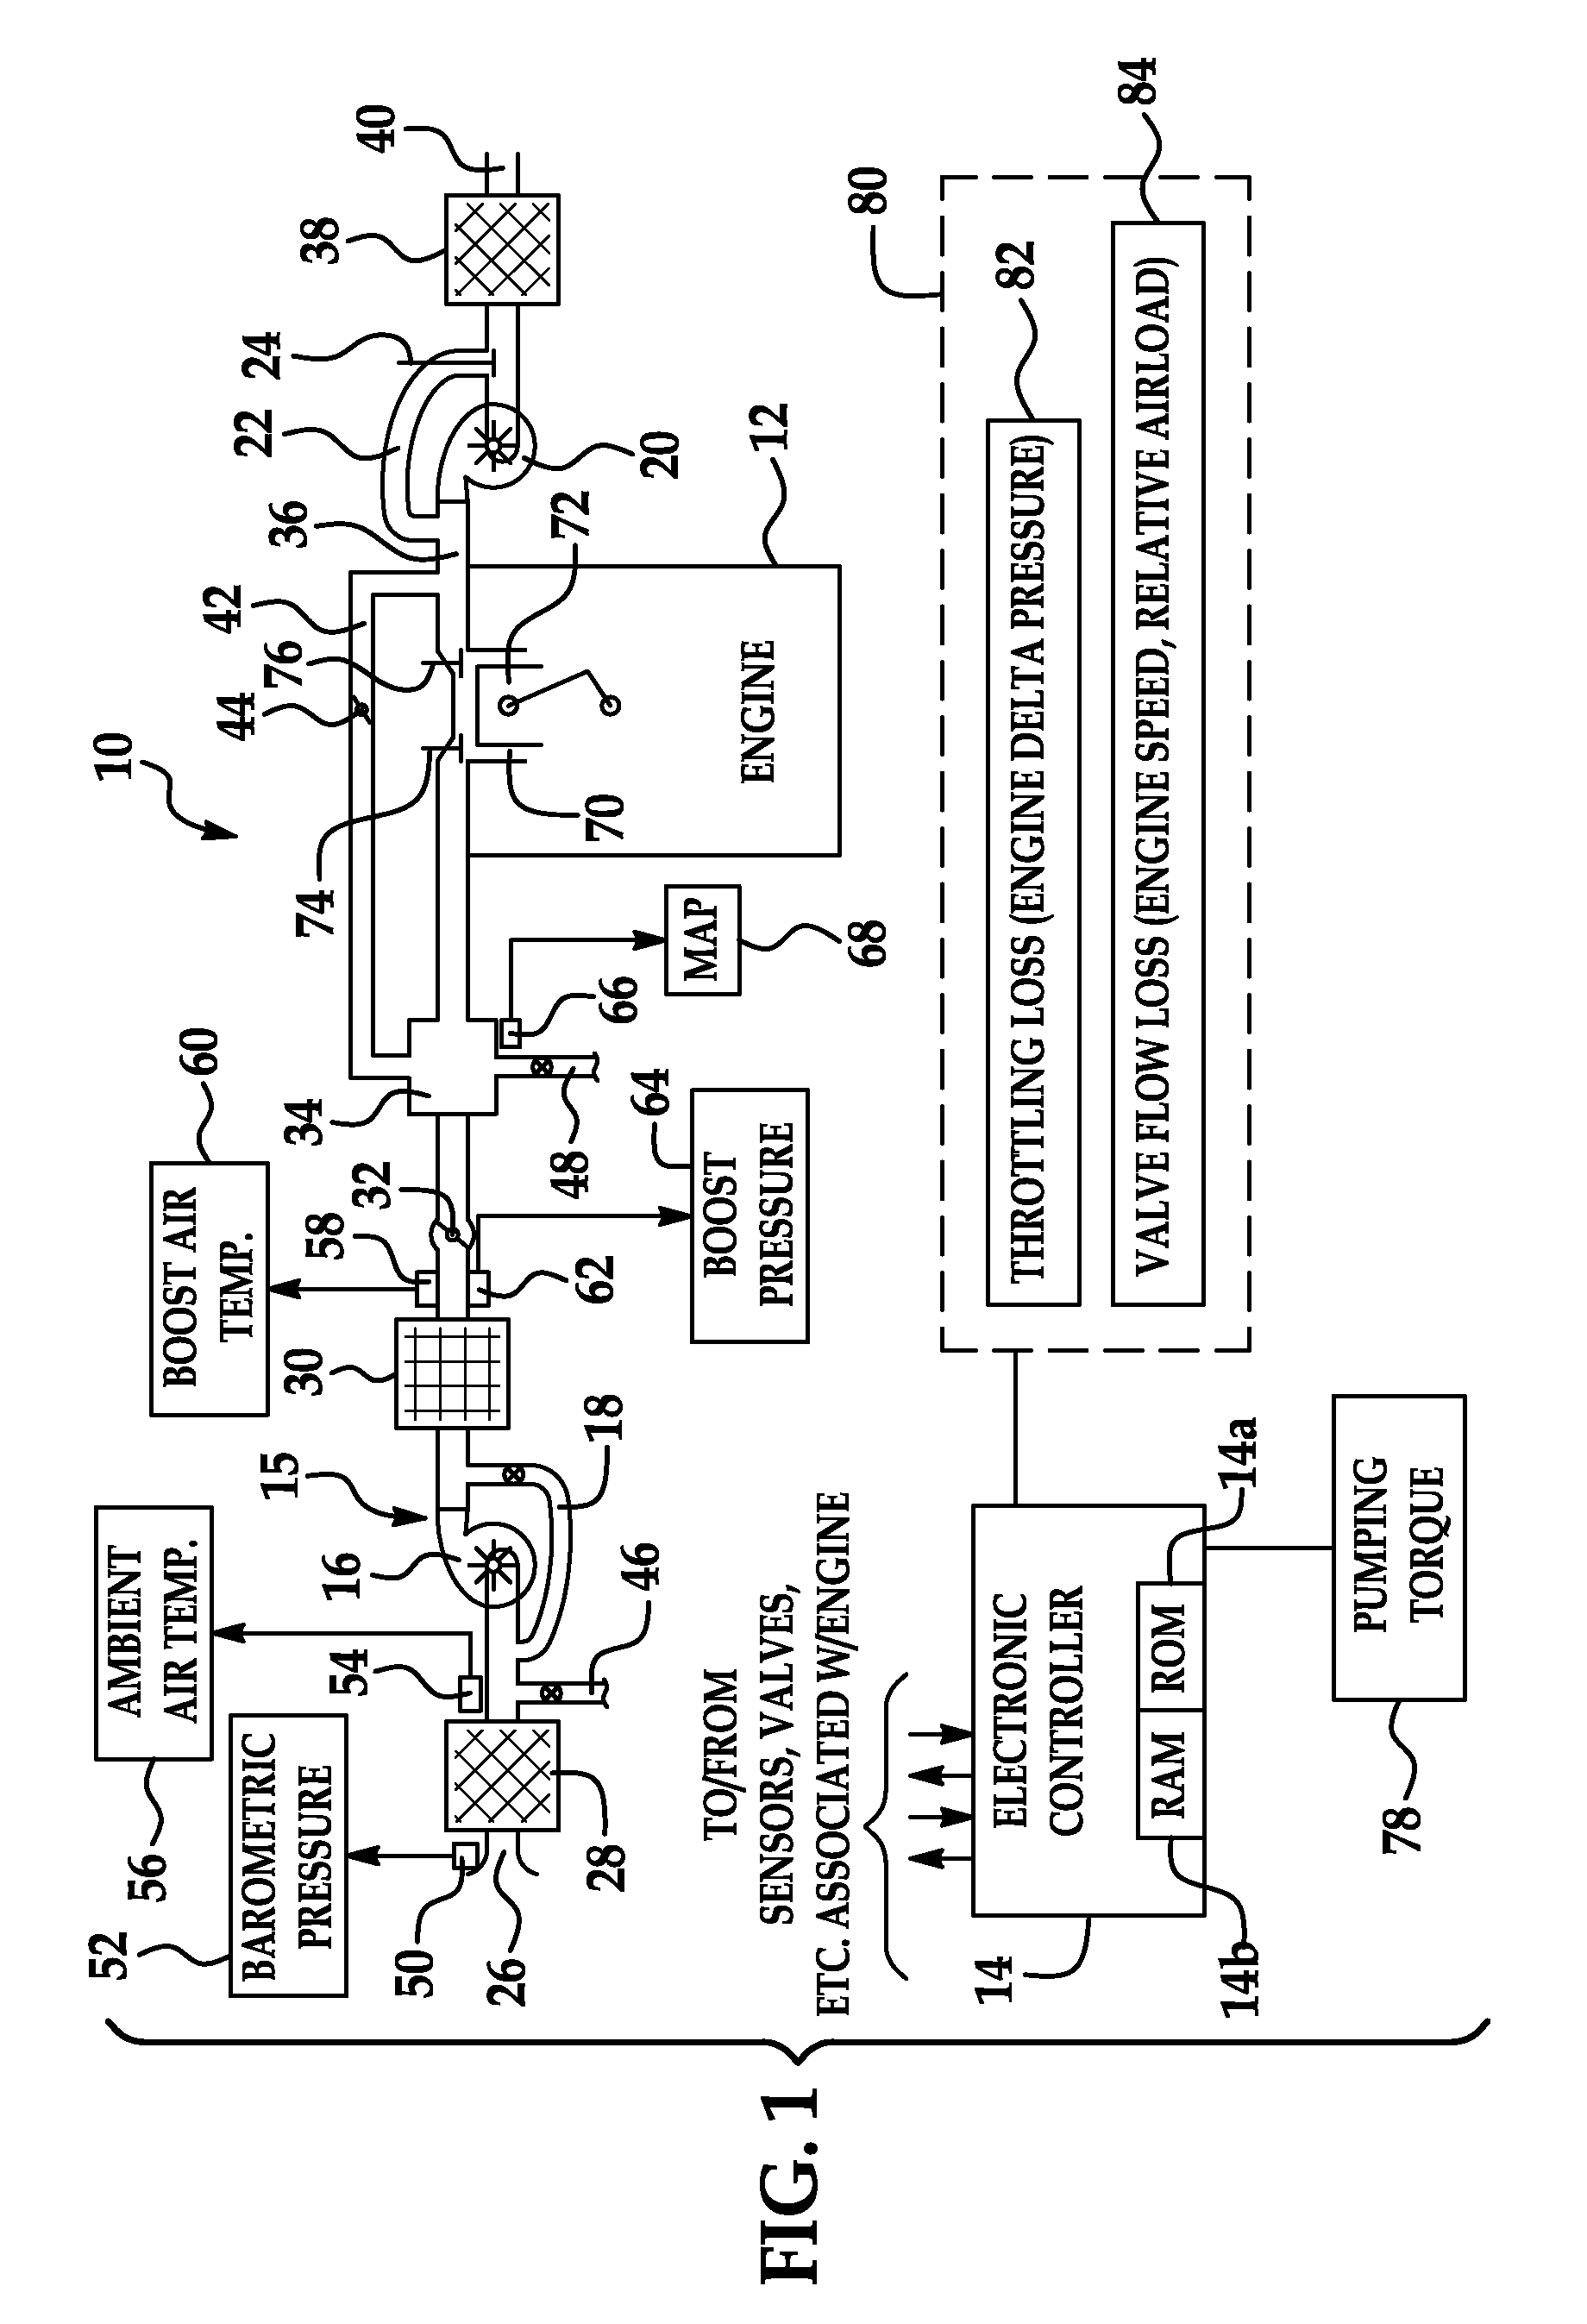 System and method for a pumping torque estimation model for all air induction configurations